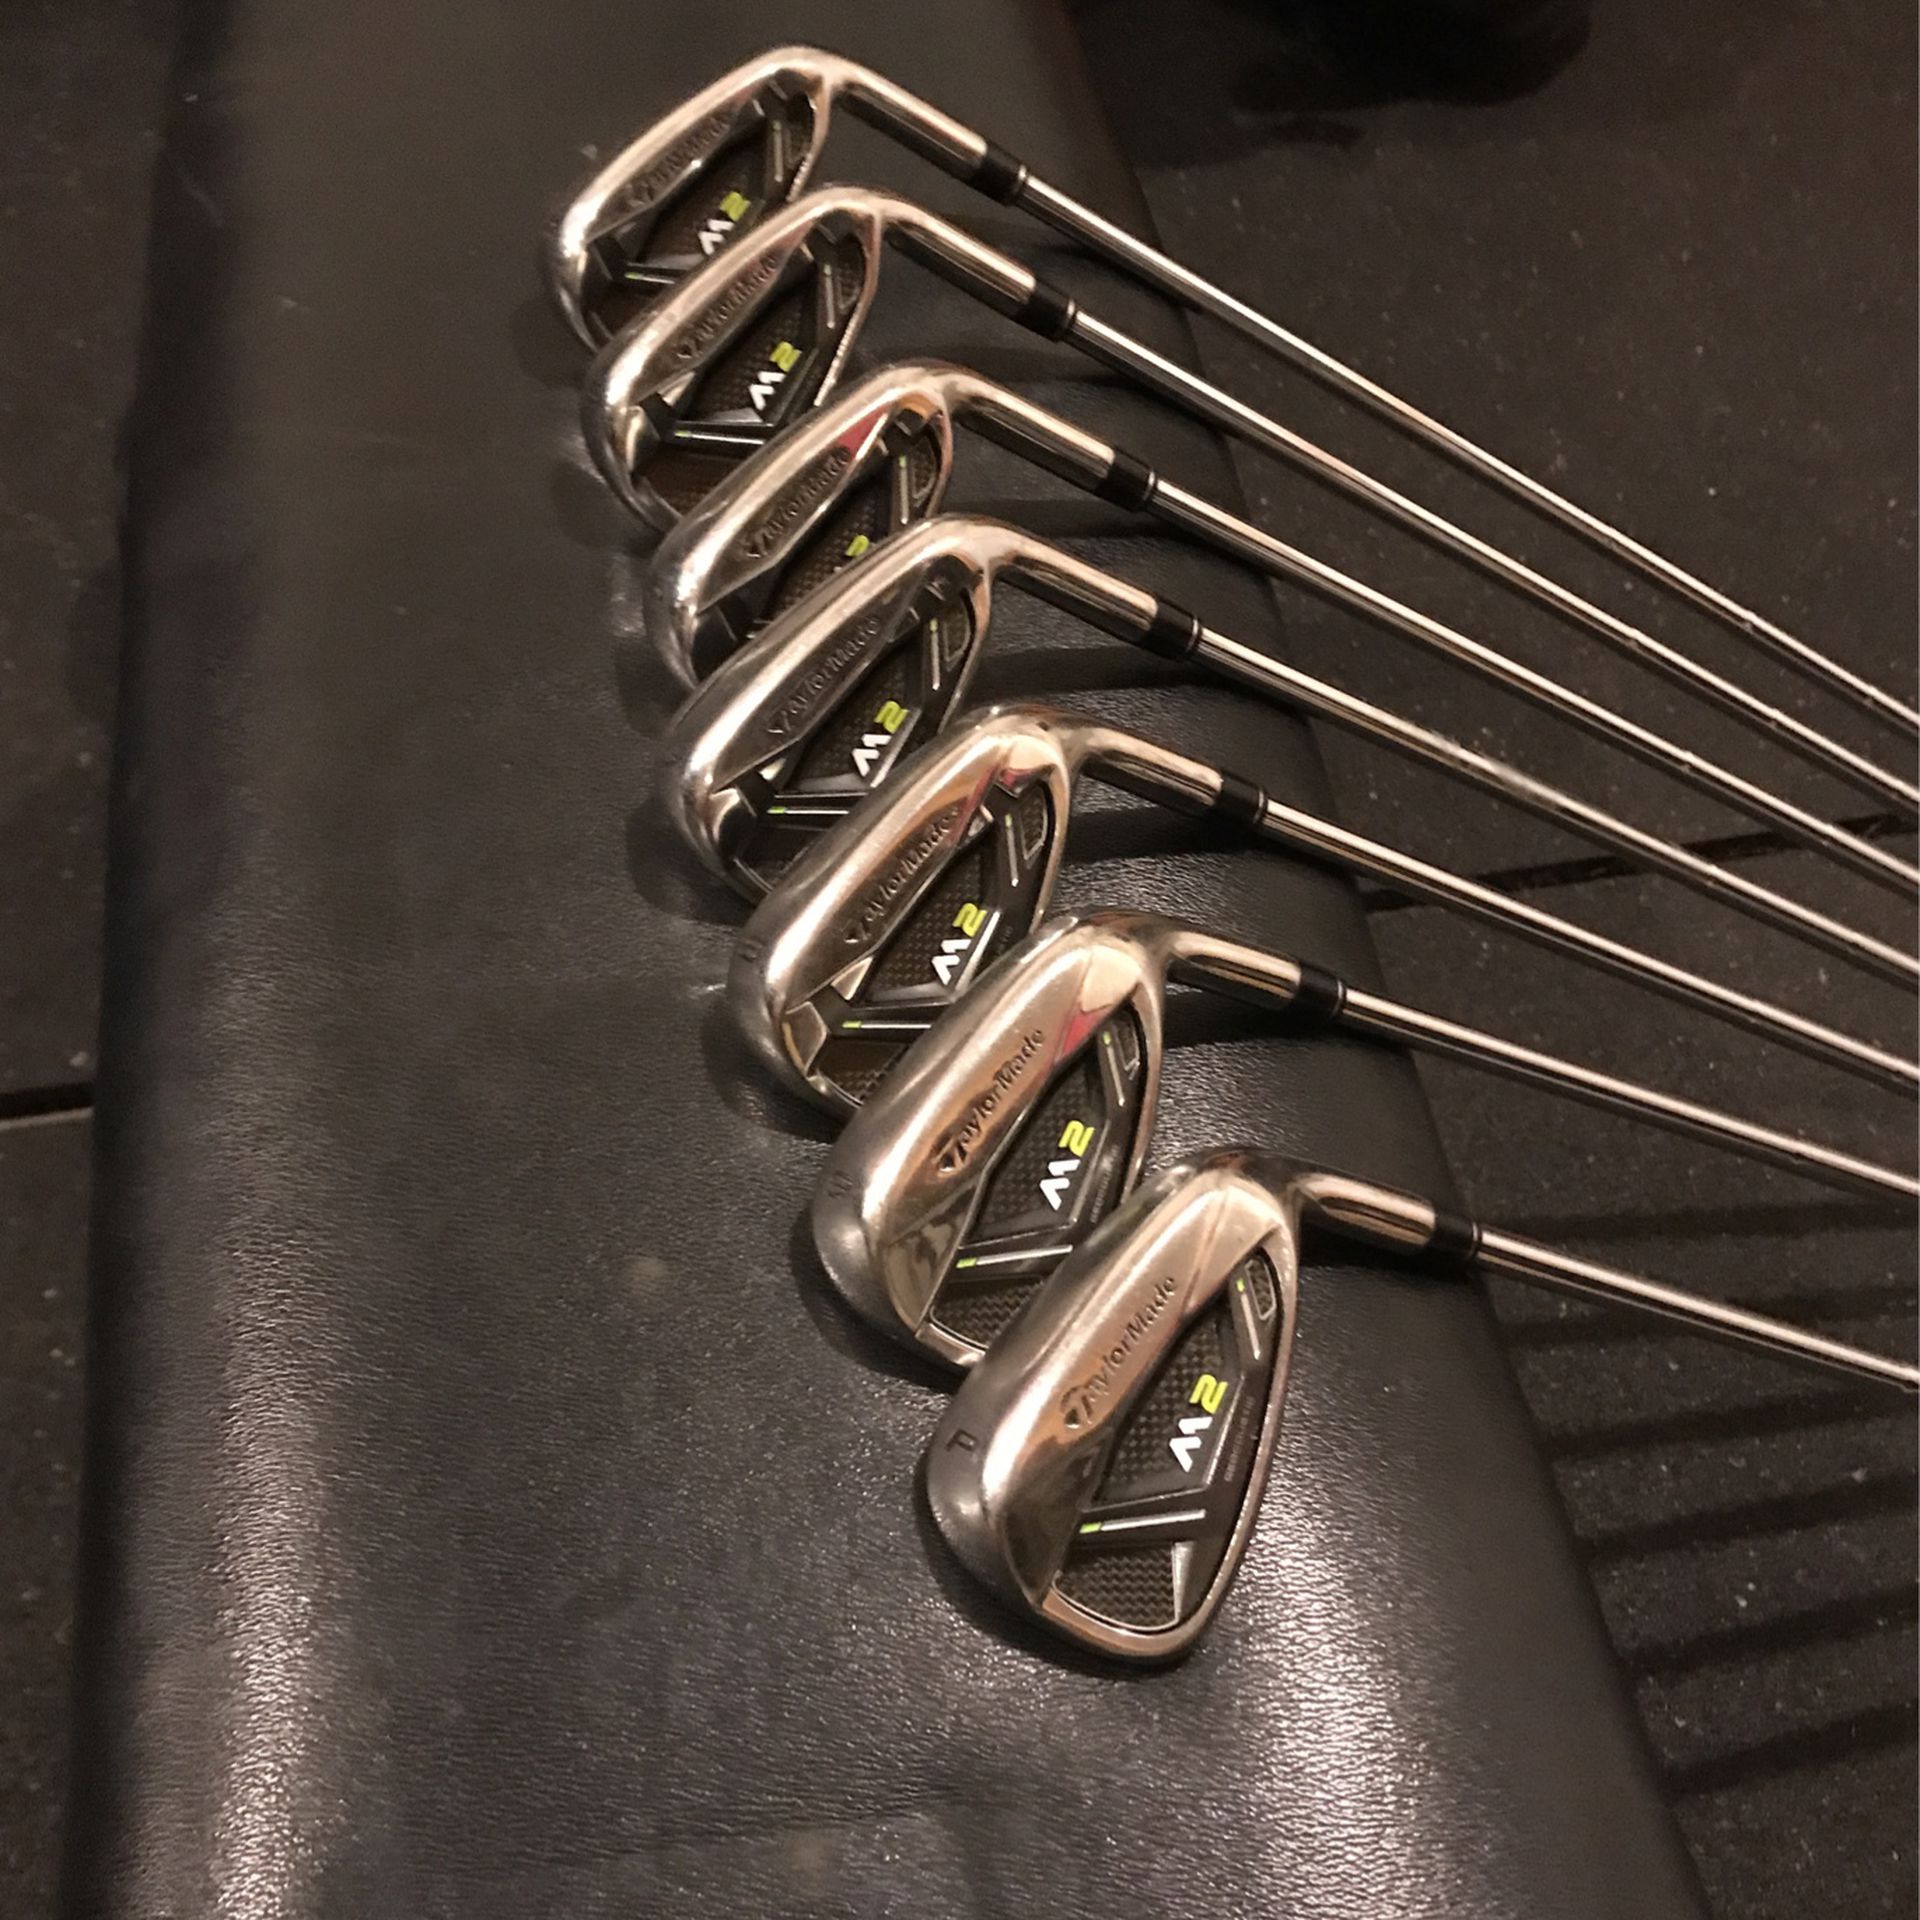 Taylormade M2 Irons 4-PW $425 Obo